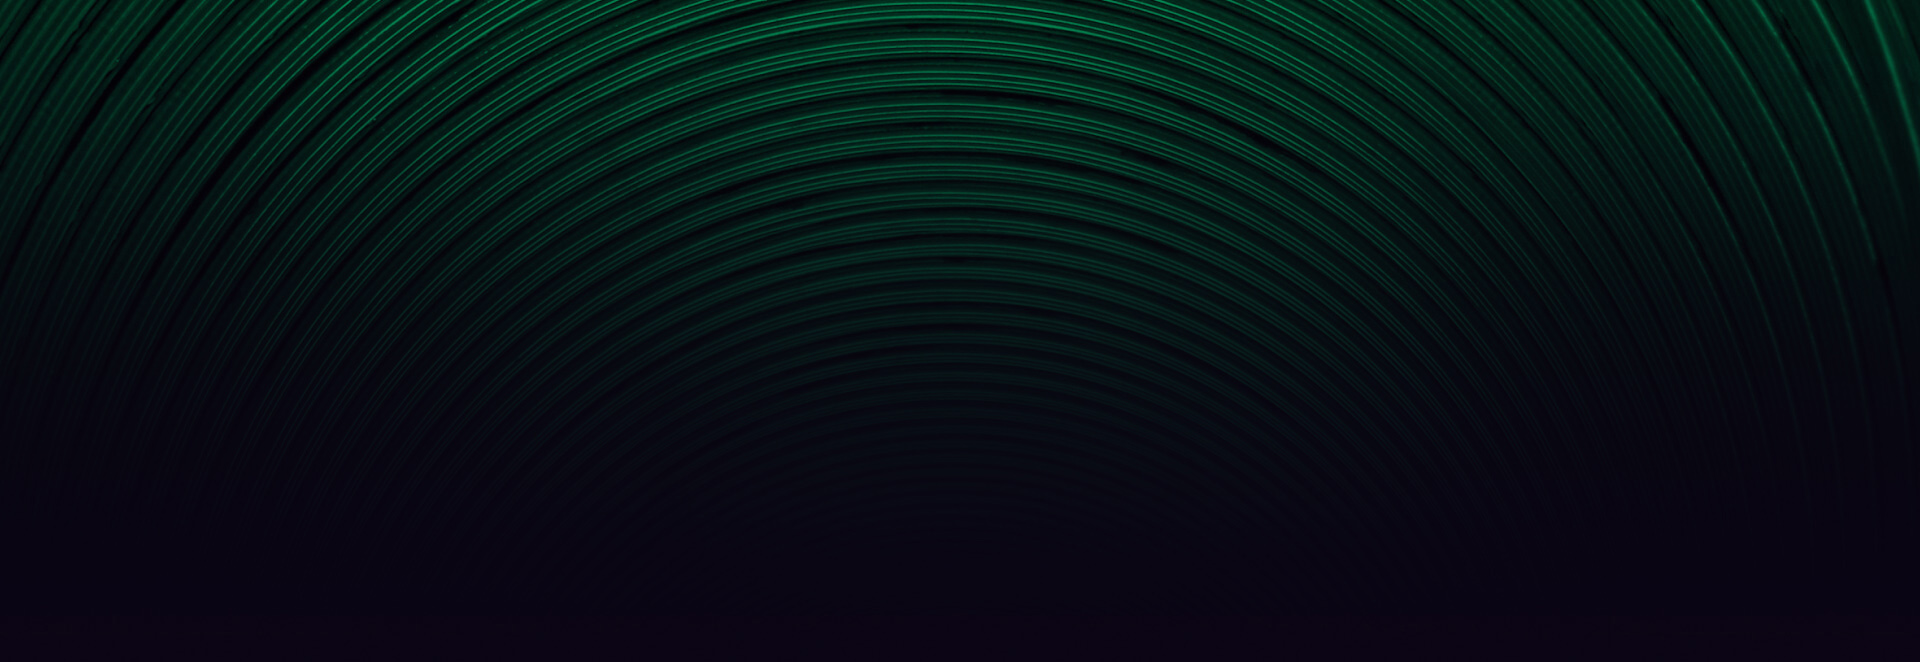 Dark green graphic with geometric concentric circles